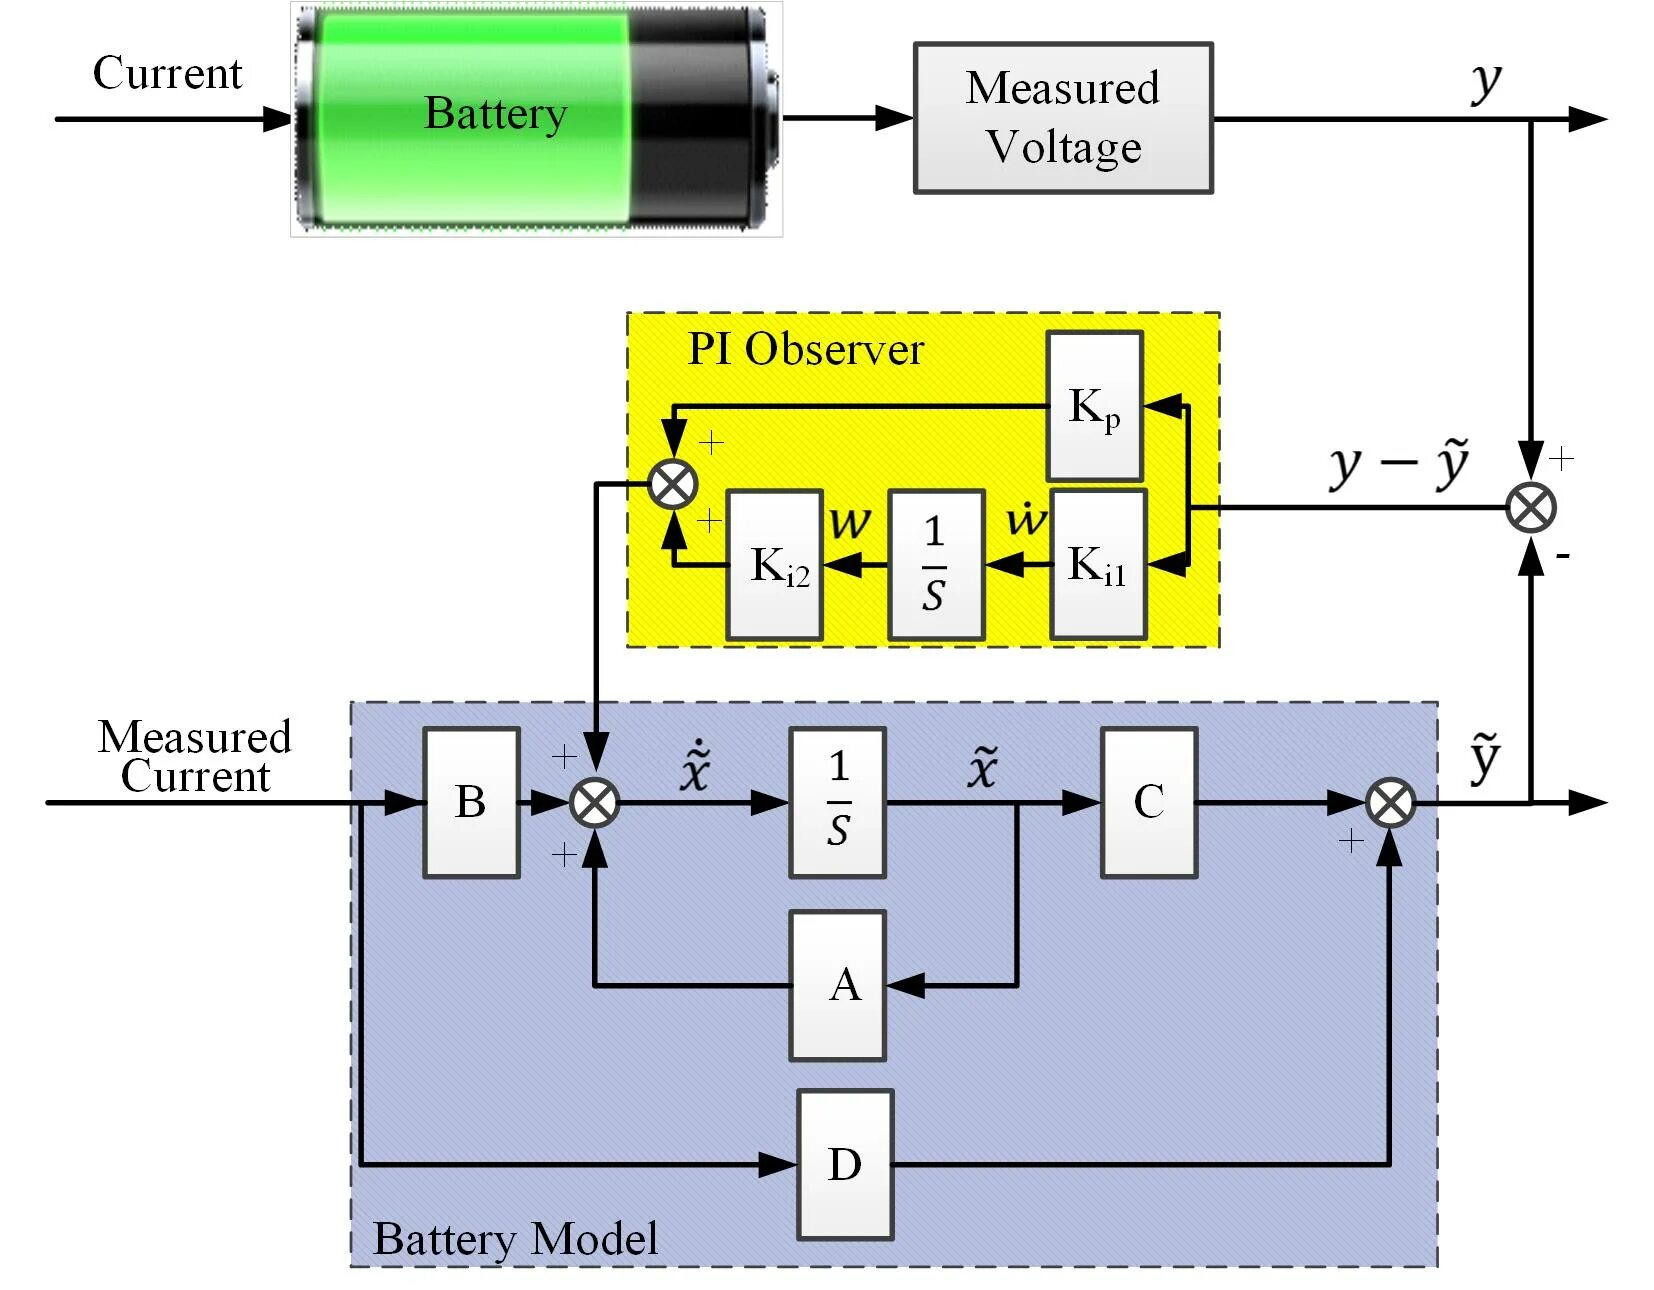 1 power battery. Battery Electric scheme. Electric vehicle Battery. Battery Management System schematic. Battery scheme.